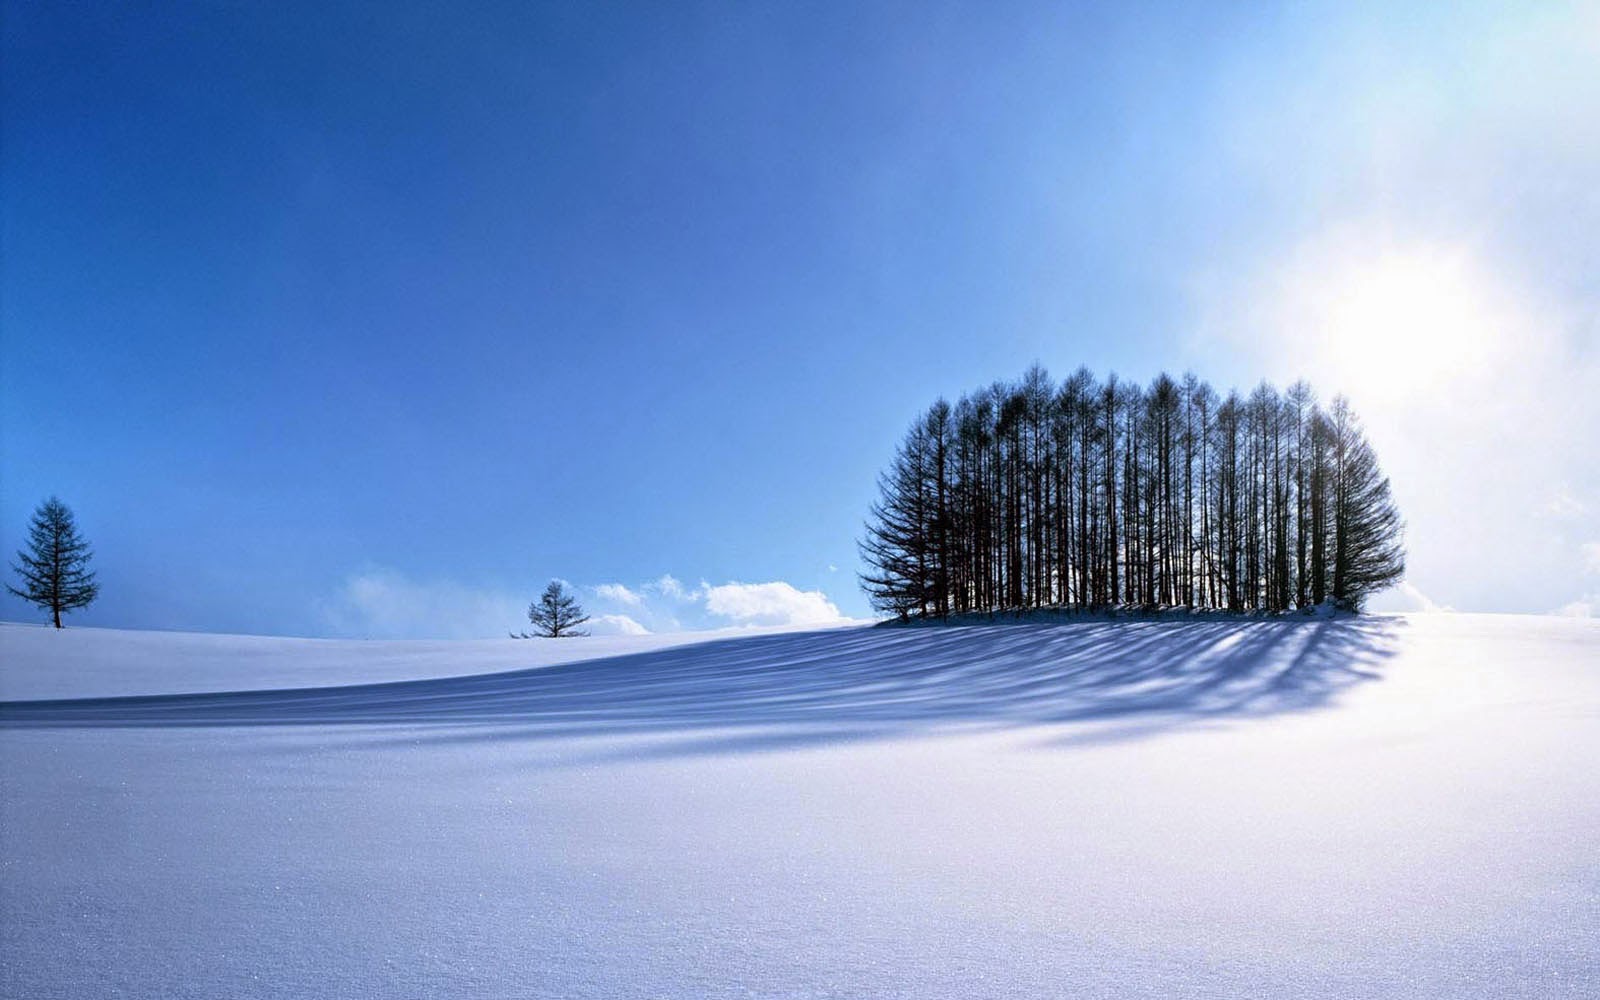 Tag Beautiful Winter Scenery Wallpaper Background Photos Image